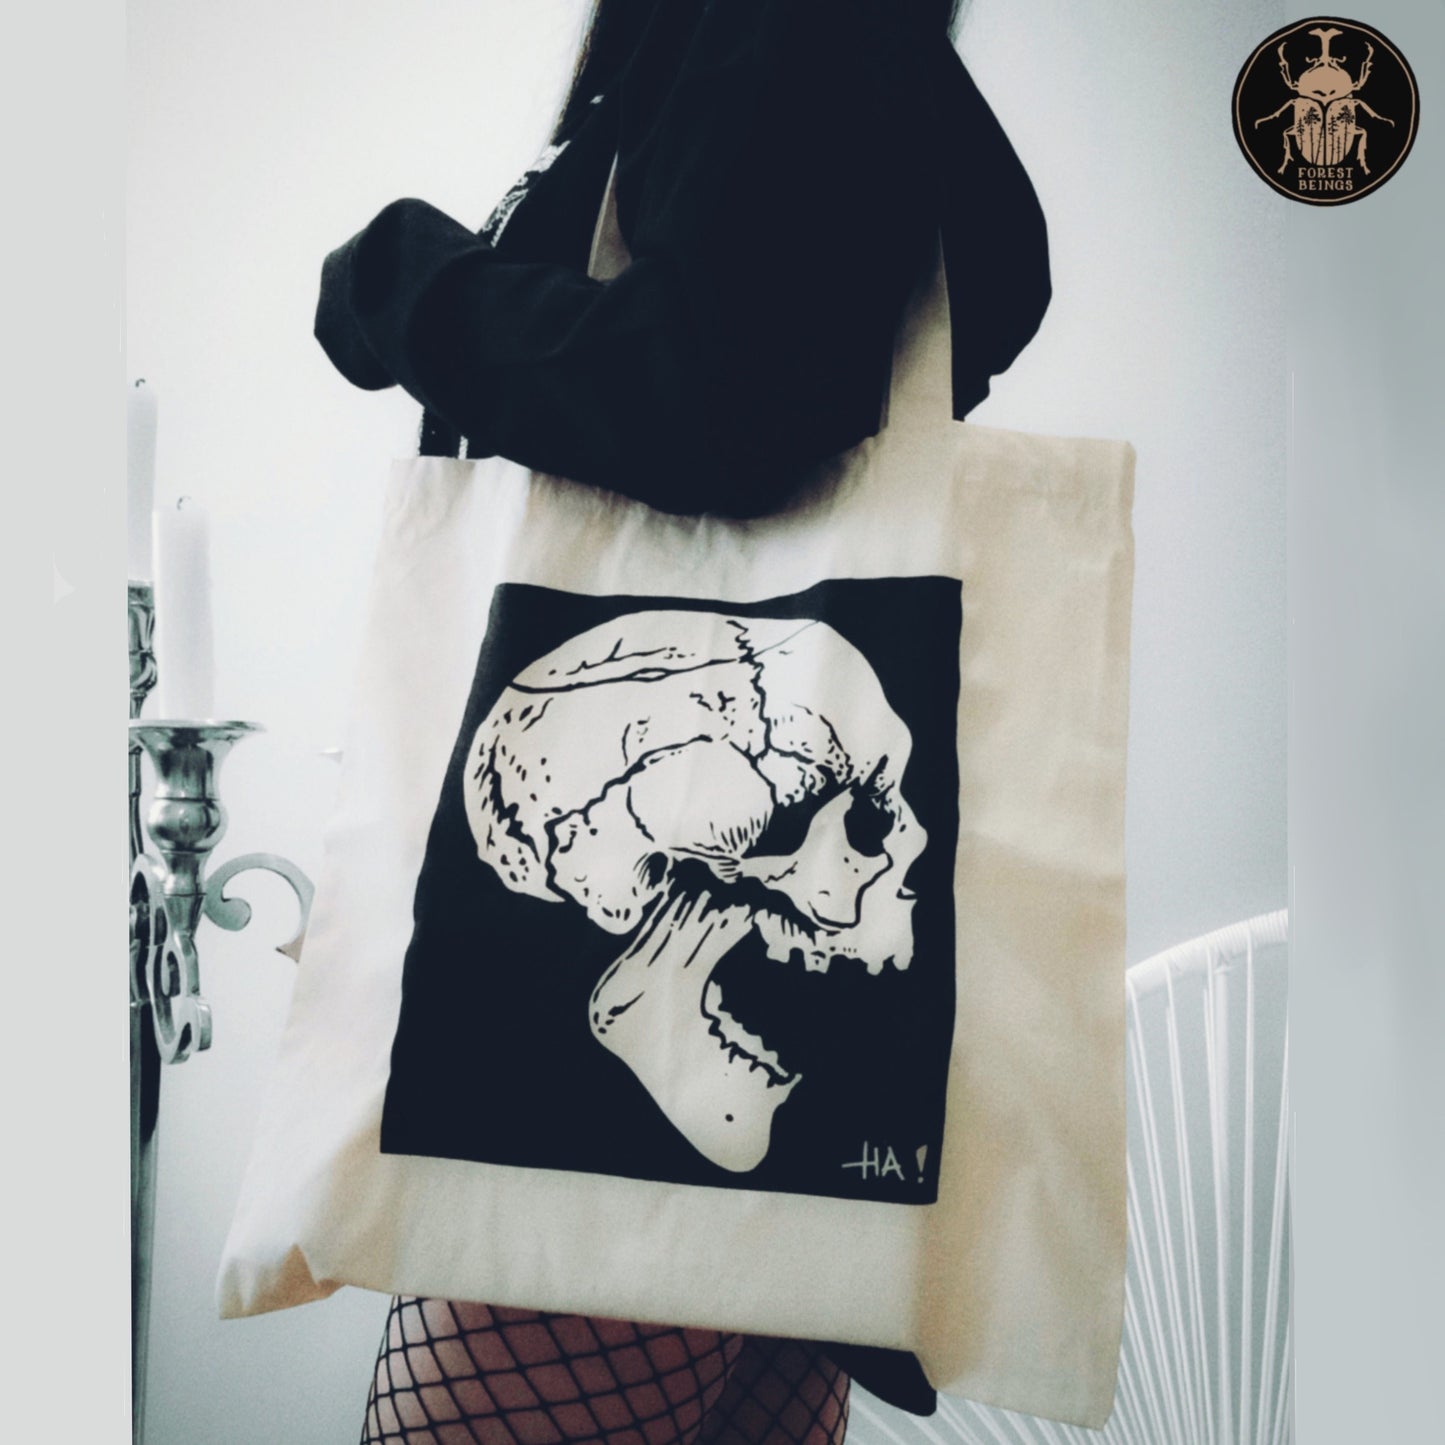 A black laughing skull on a gothic aesthetic edgy tote bag worn by a goth girl in black.